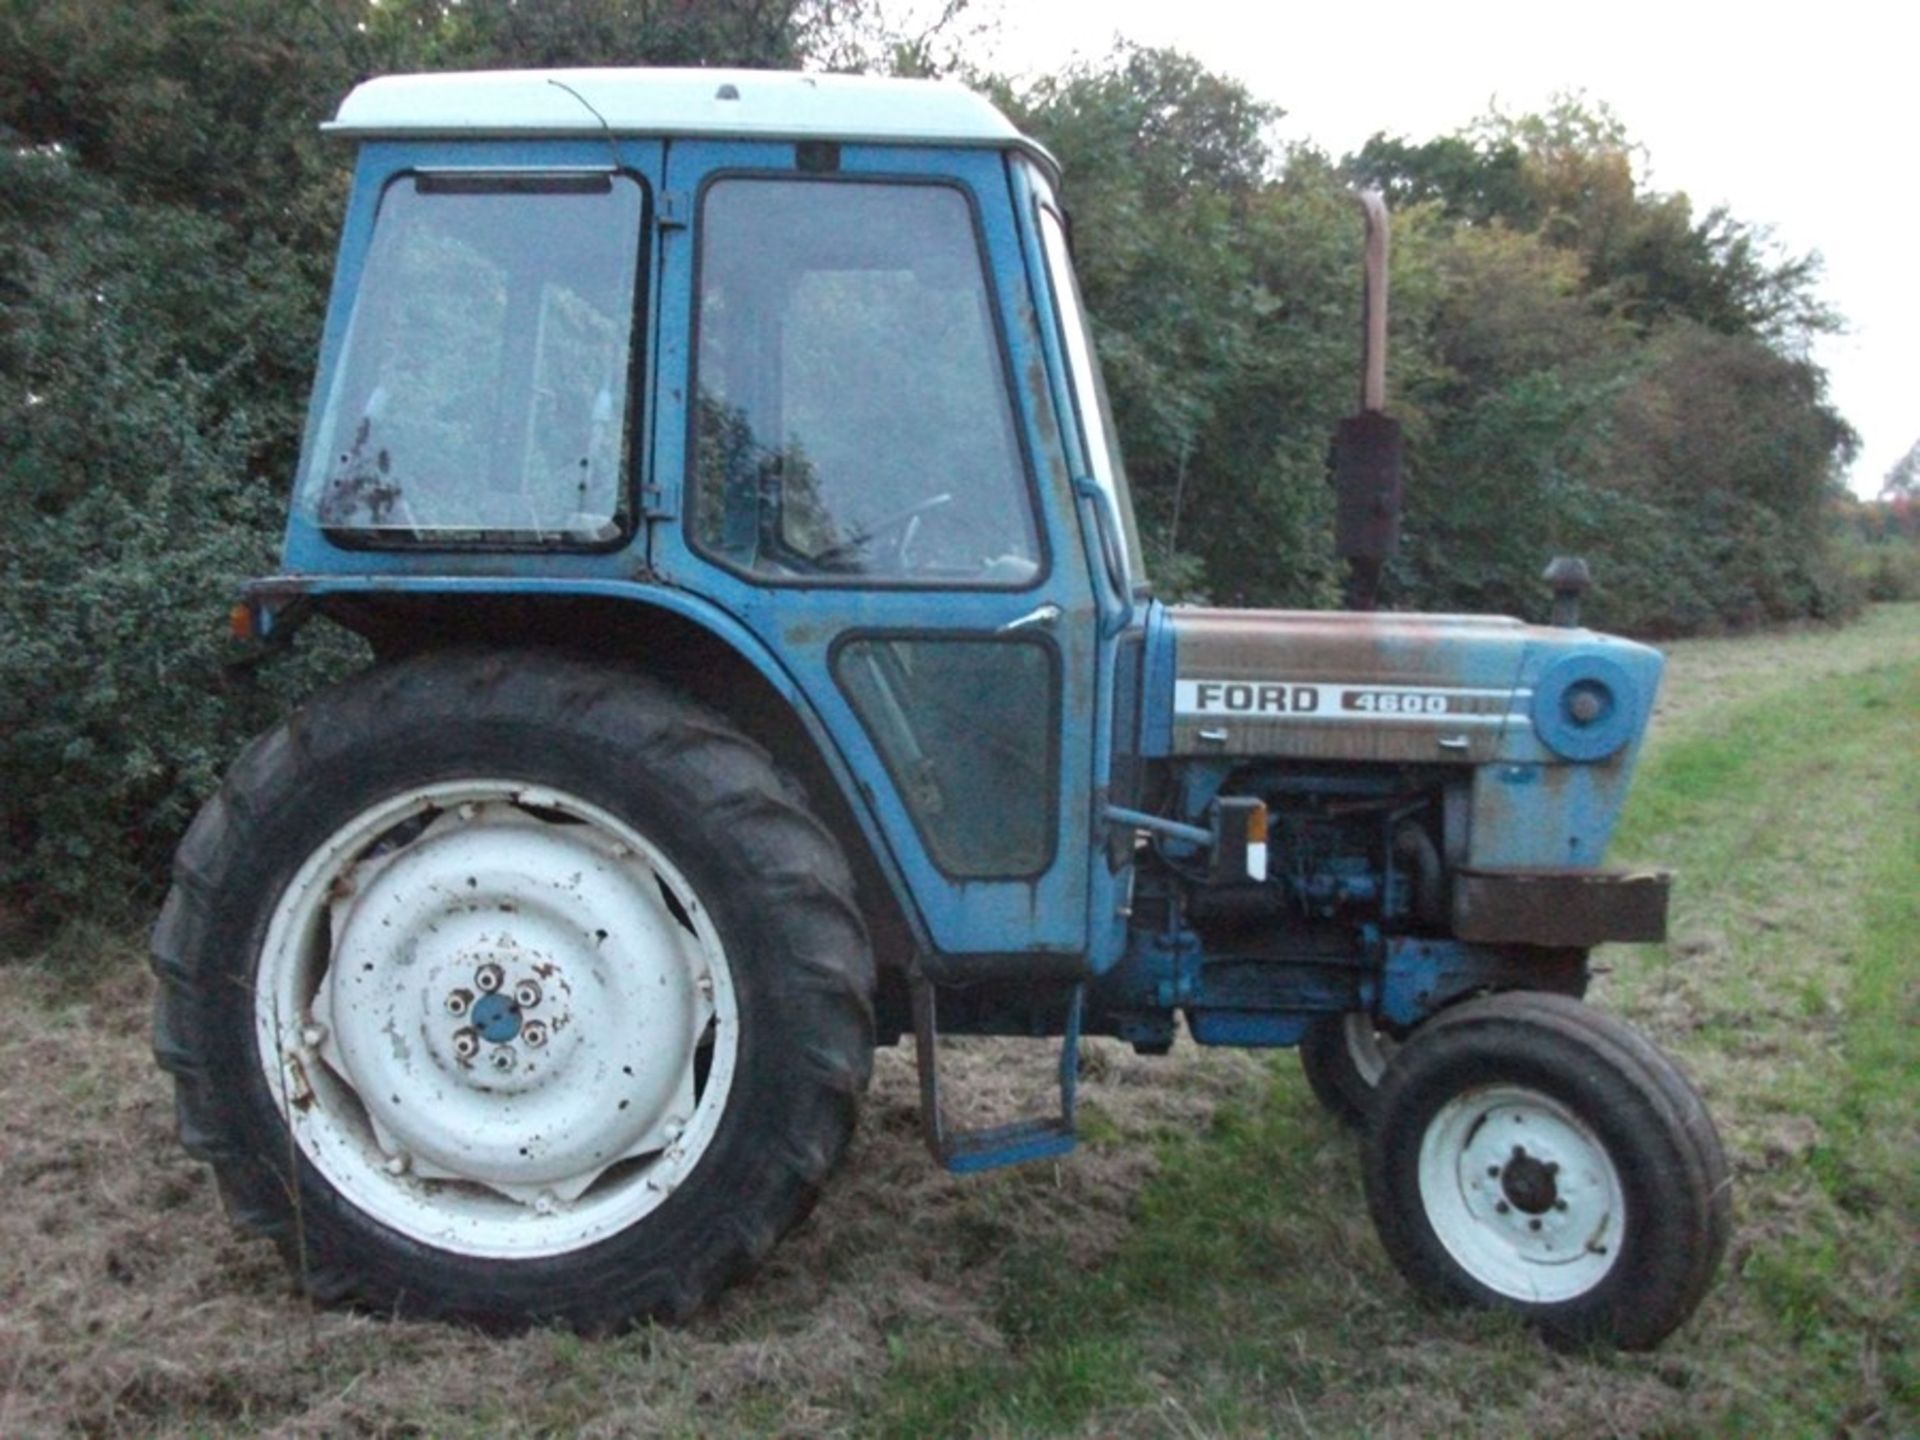 Ford 4600 2wd Tractor Reg No FMJ 633T (HOURS 5641) (RUNNING WELL)